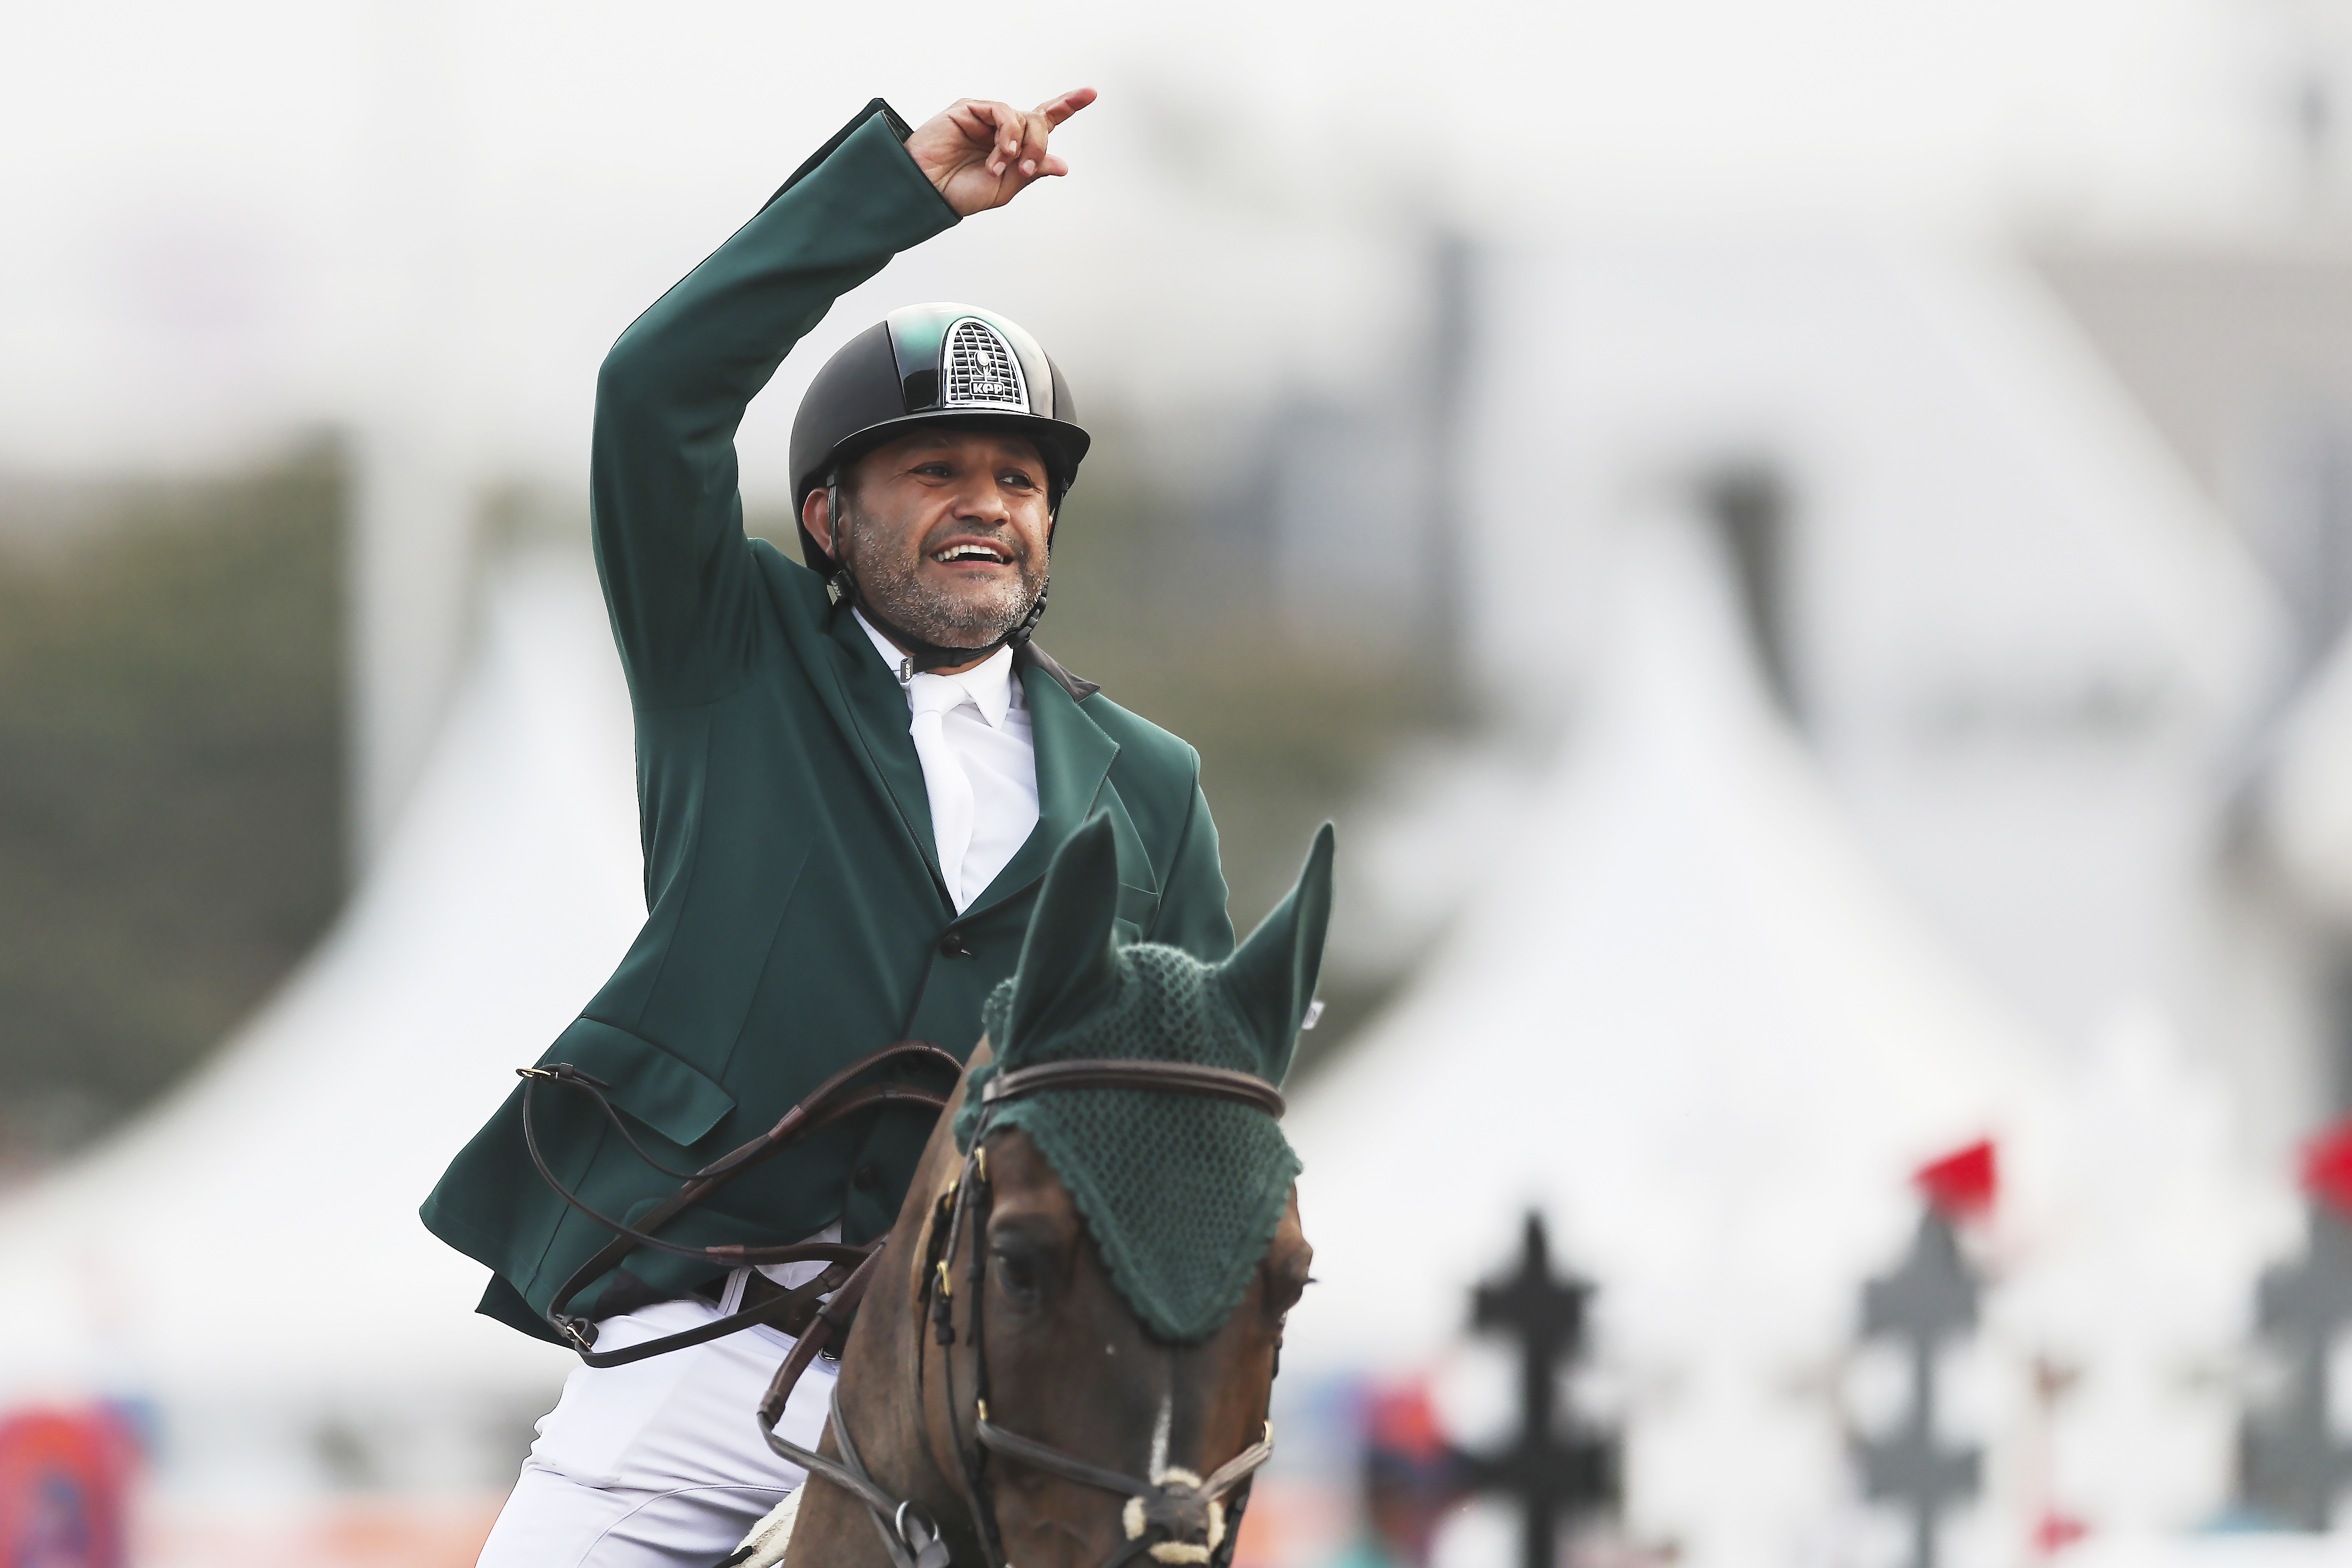 Ramzy Hamad Alduhami of Saudi Arabia, riding Ted, celebrates during the jumping event at the equestrian competition of the 18th Asian Games at Jakarta International Equestrian Park on August 28, 2018 in Jakarta, Indonesia.